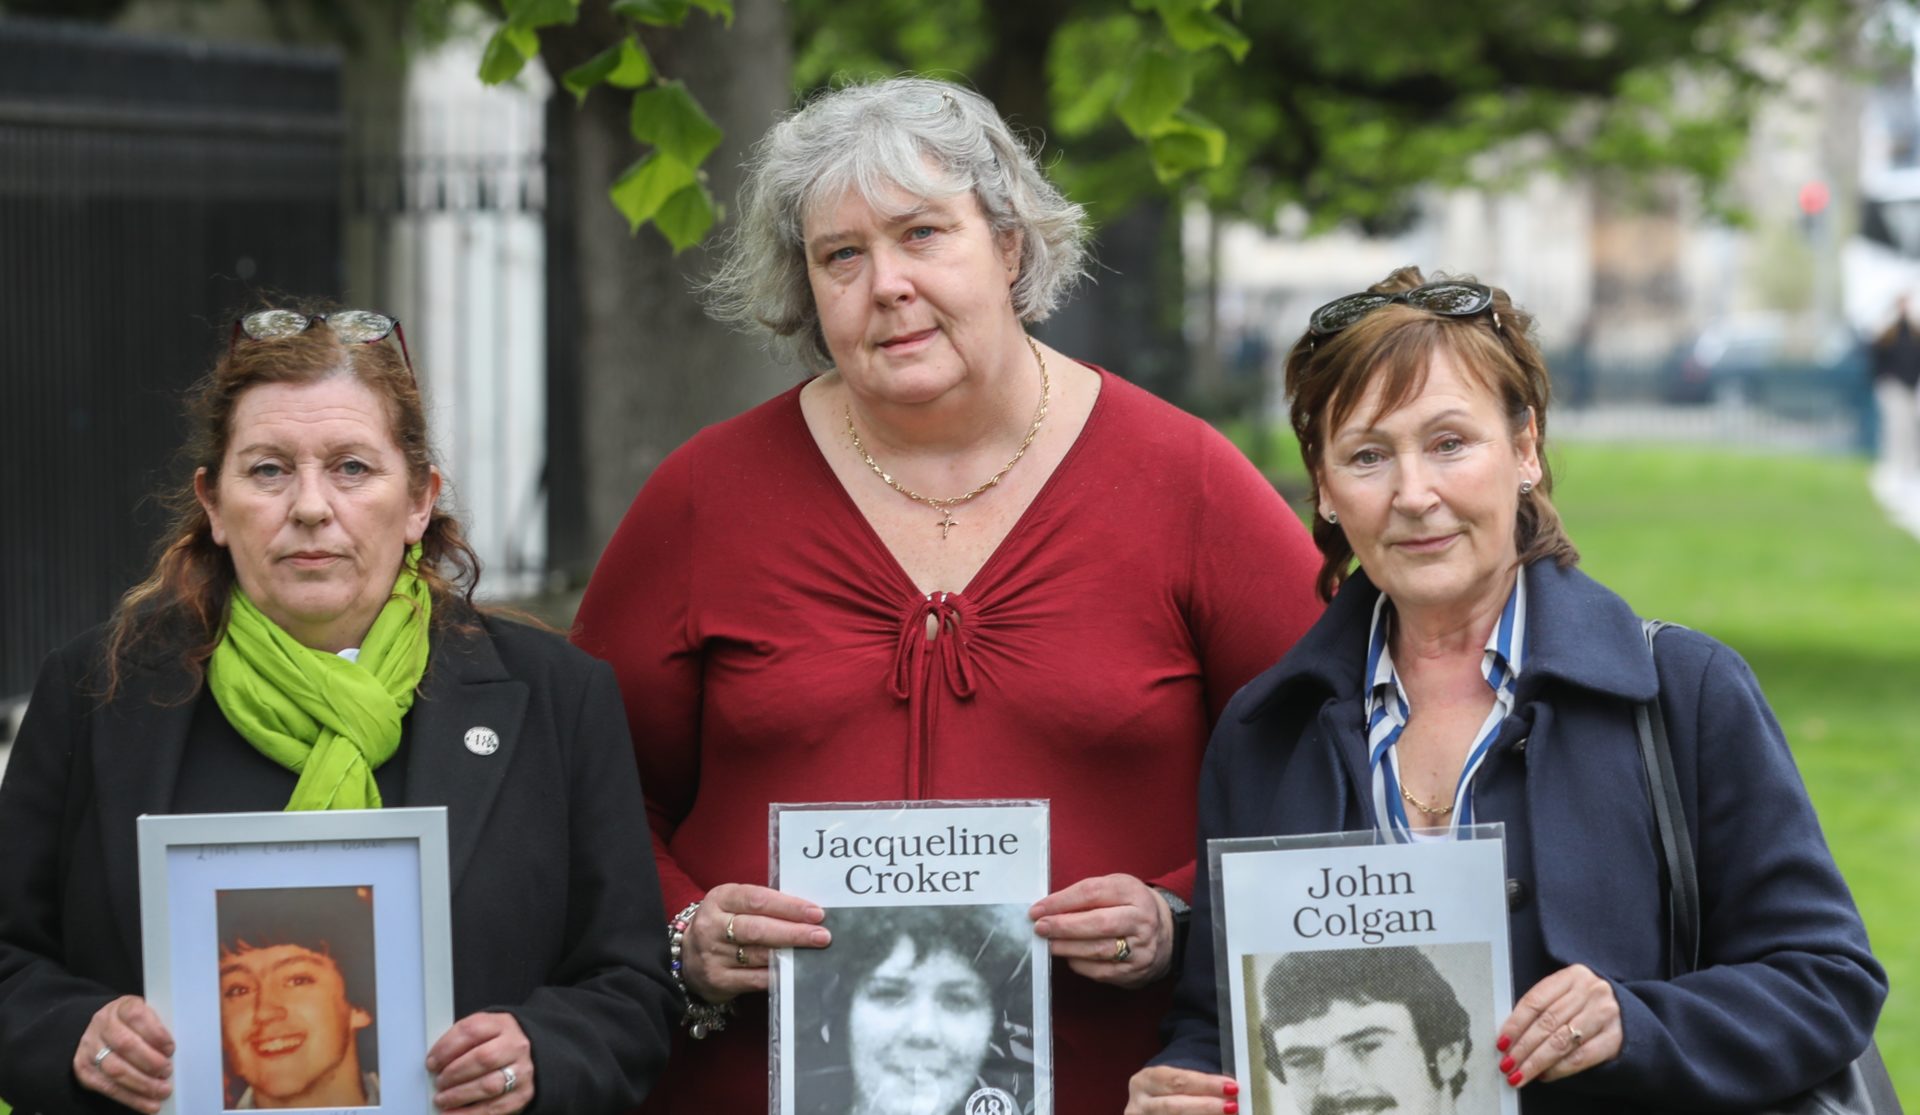 Pictured outside the Stardust Inquest holding portraits of victims (left to right): Susan Behan with portrait of John Colgan (21); Alison Keane with portrait of Jacqueline Croker (18); and Siobhan Kearney with portrait of Liam Dunne (18), 17-4-23.